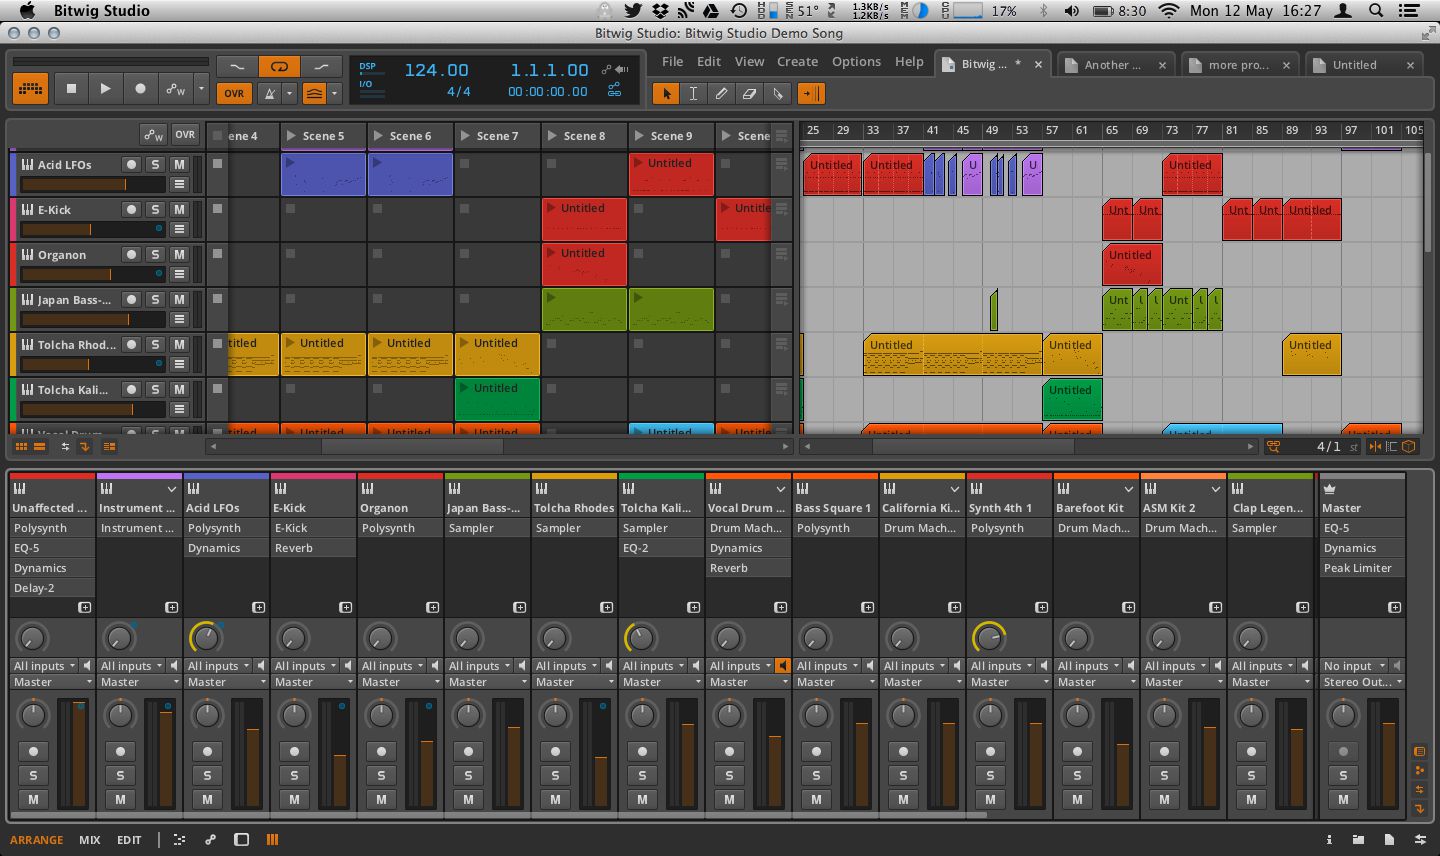 It's easy to switch between projects in Bitwig.